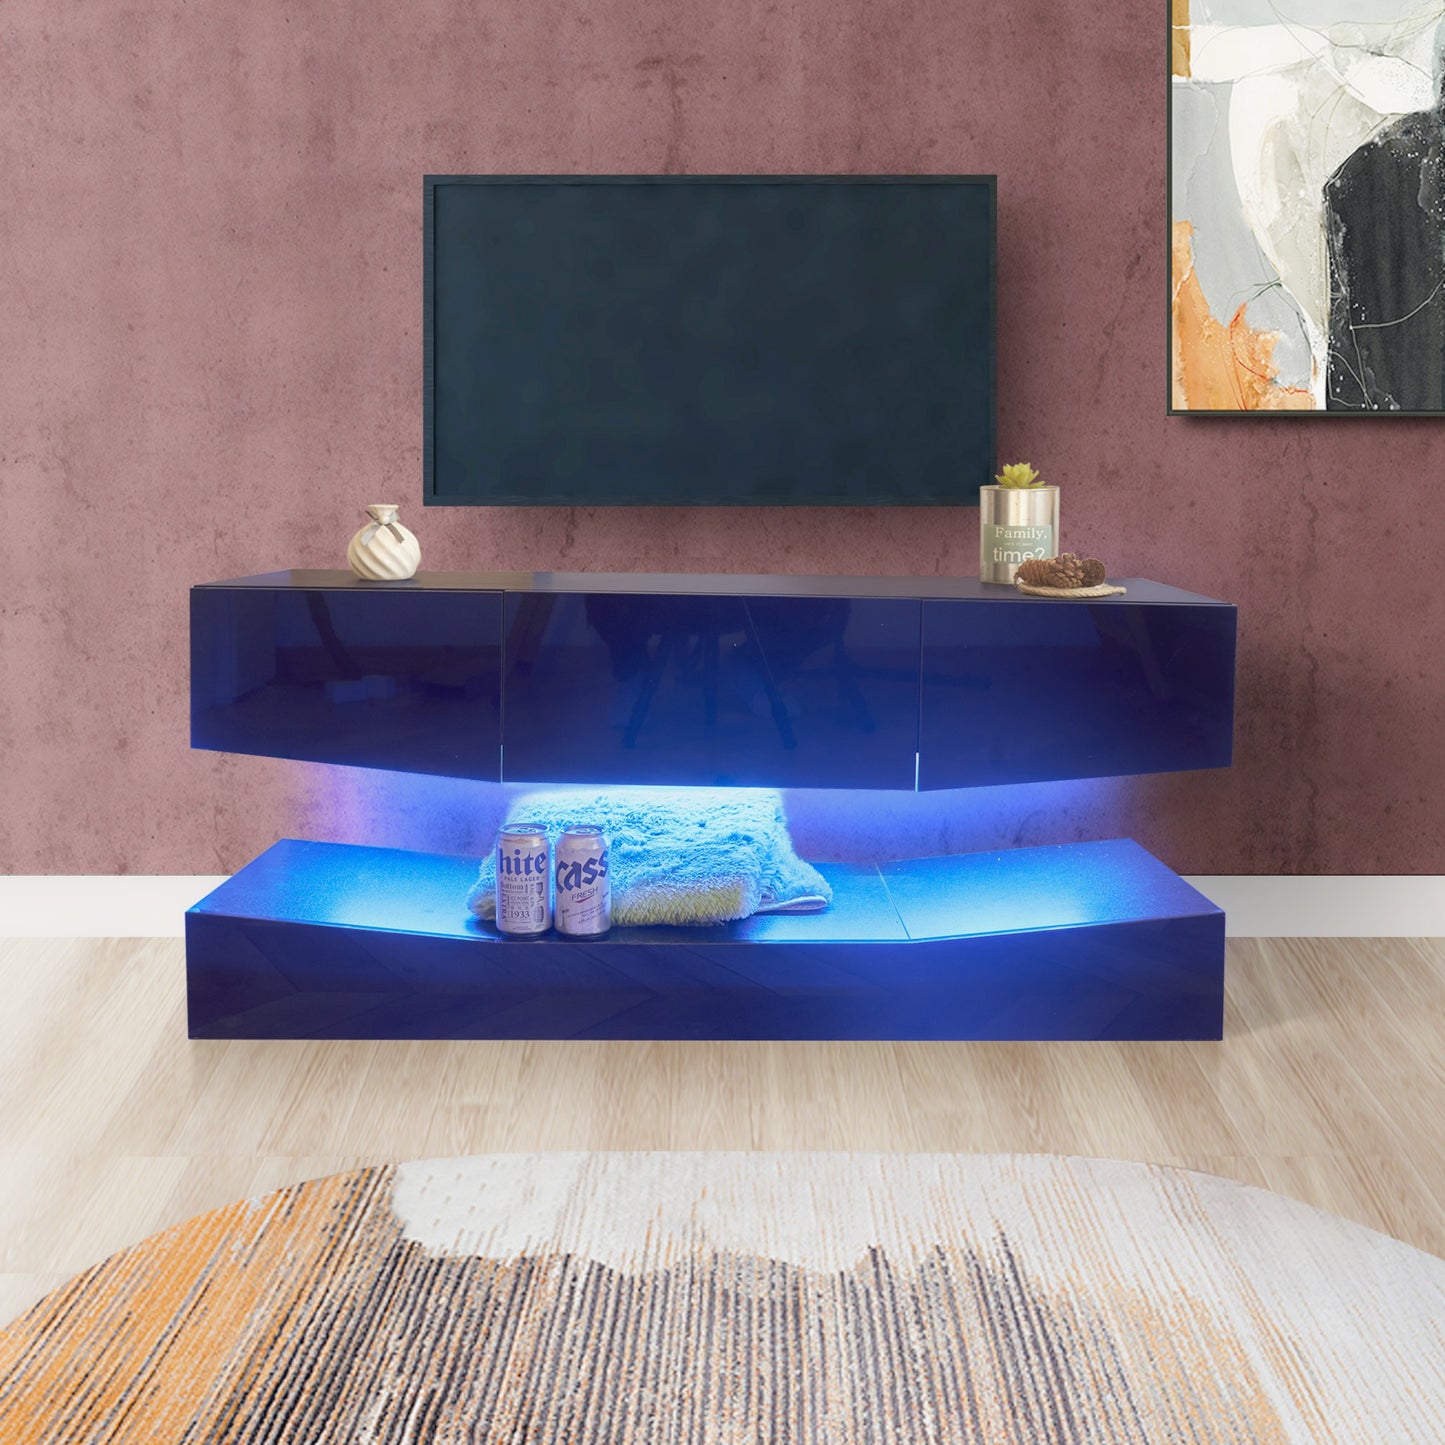 【Pottery Barn】TV Stand with LEDs Black